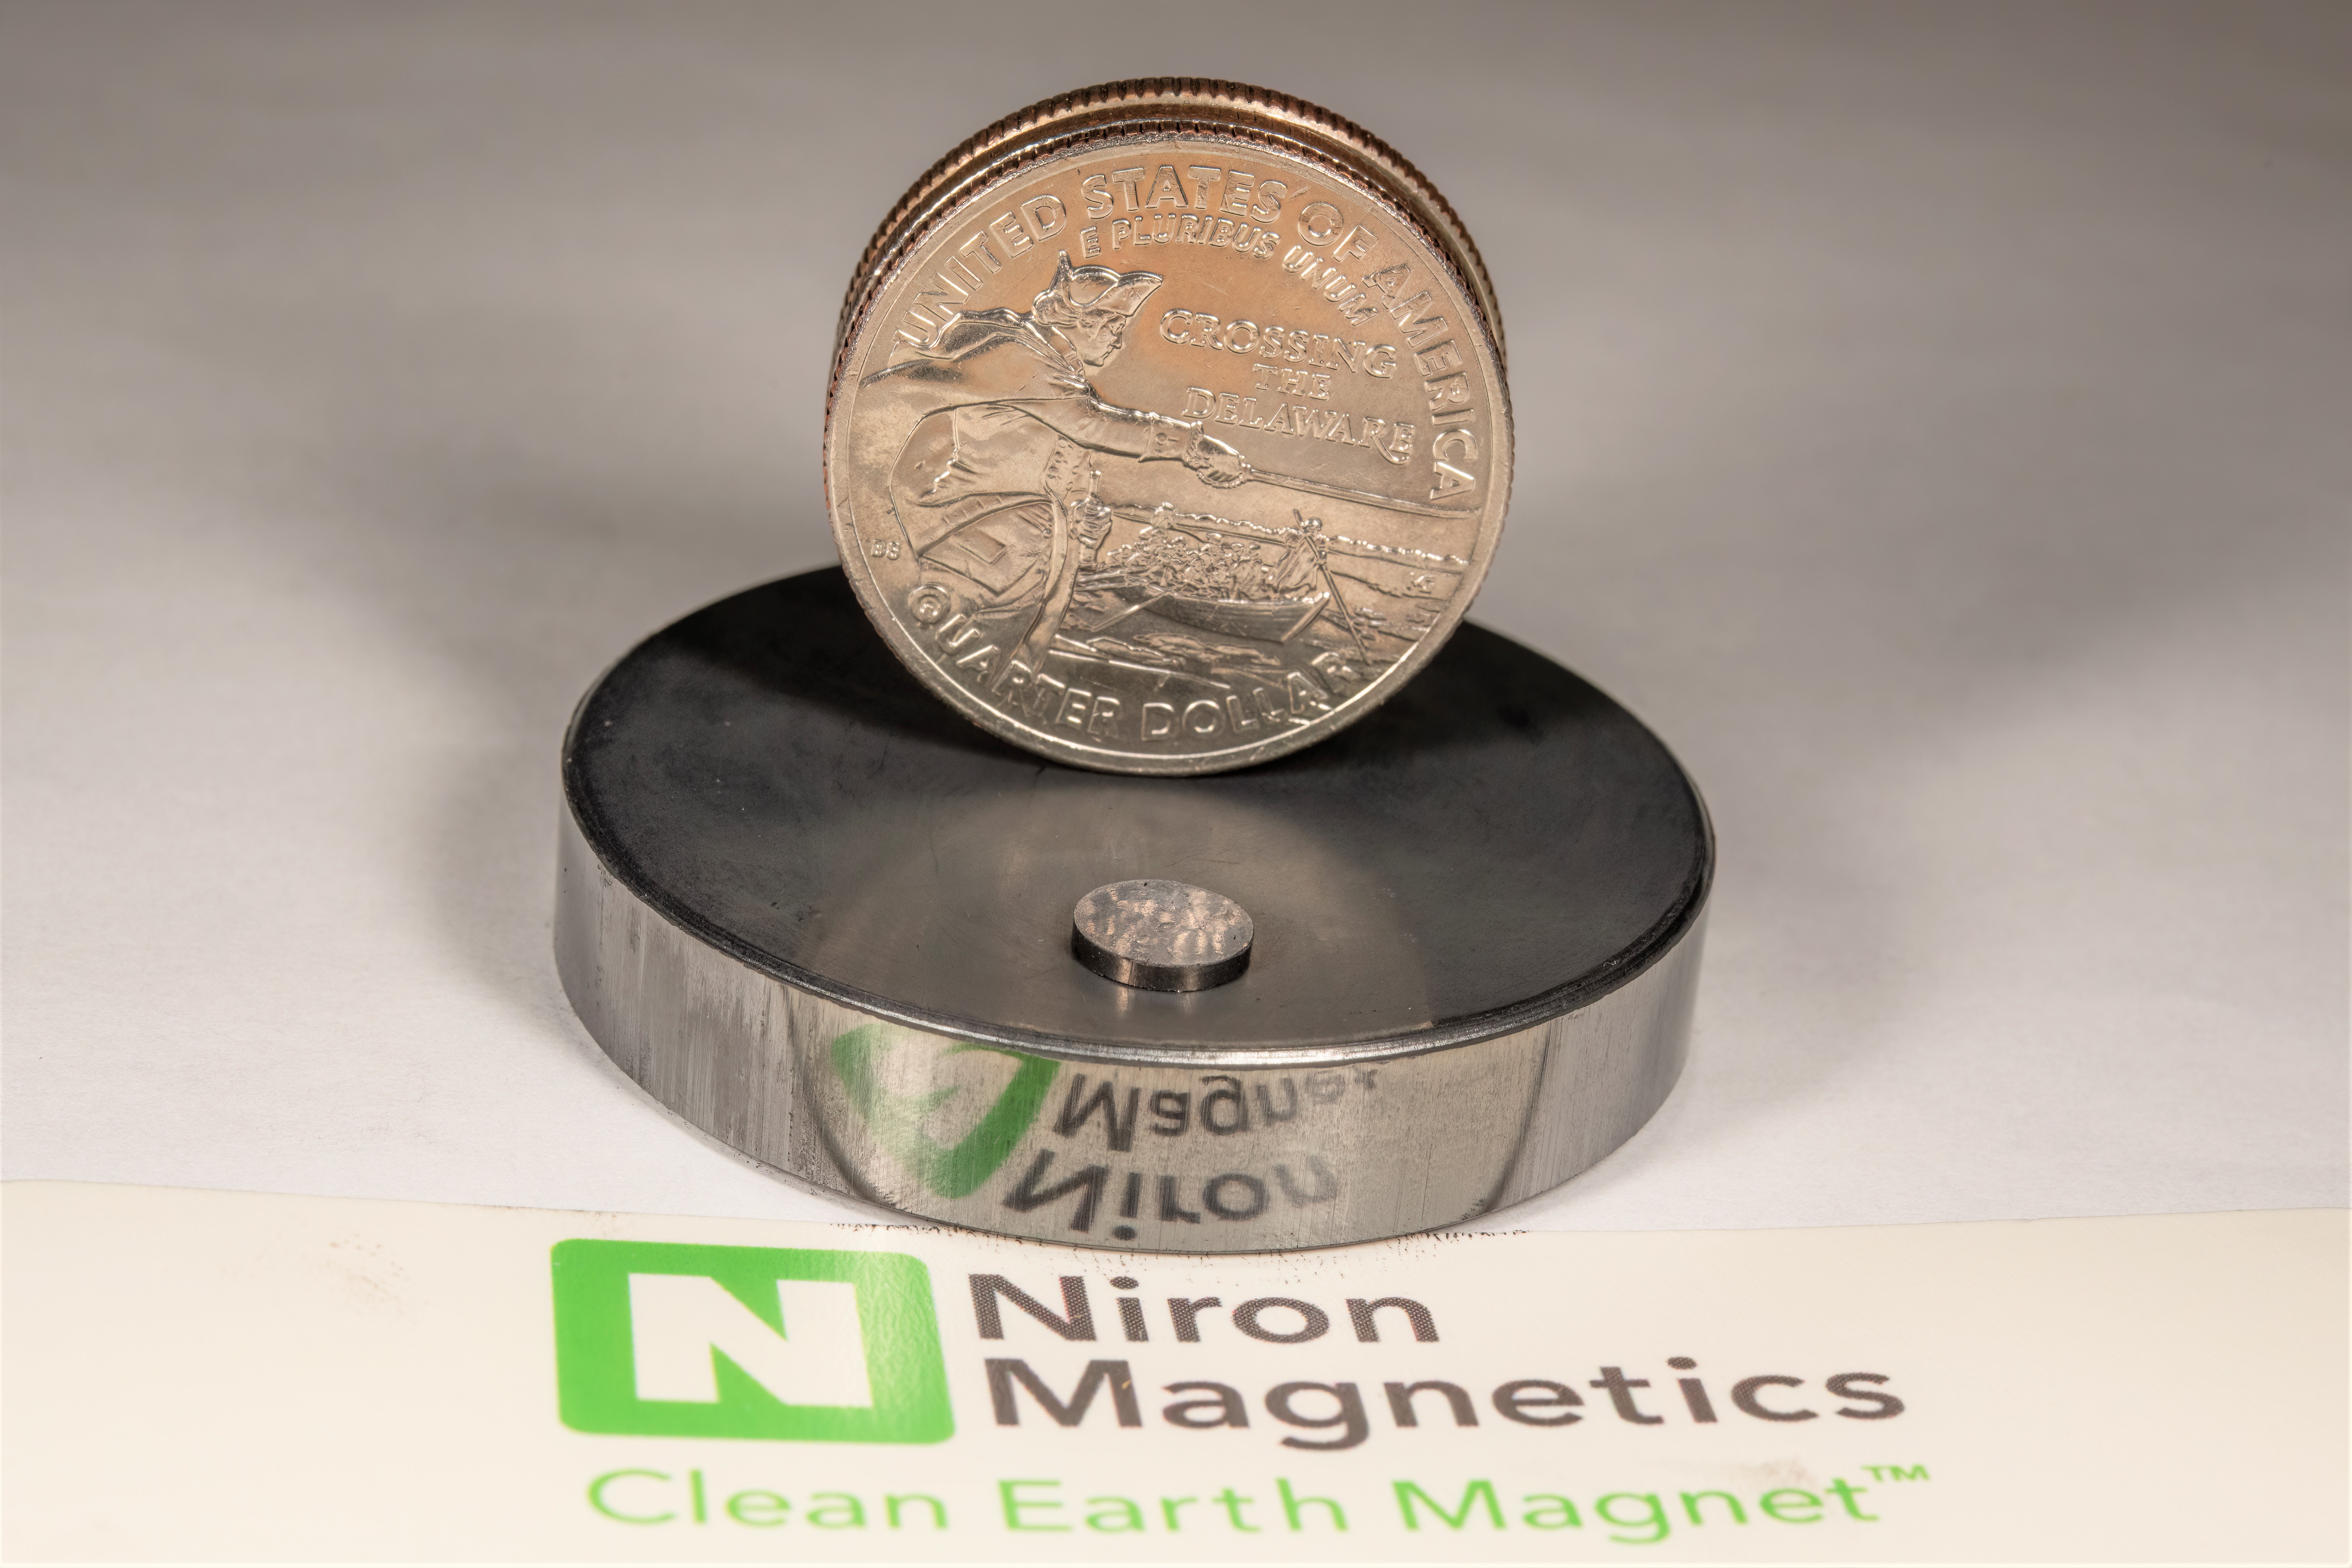 A coin and a small magnet balancing on a larger magnet, with Niron Magnetics' logo below.